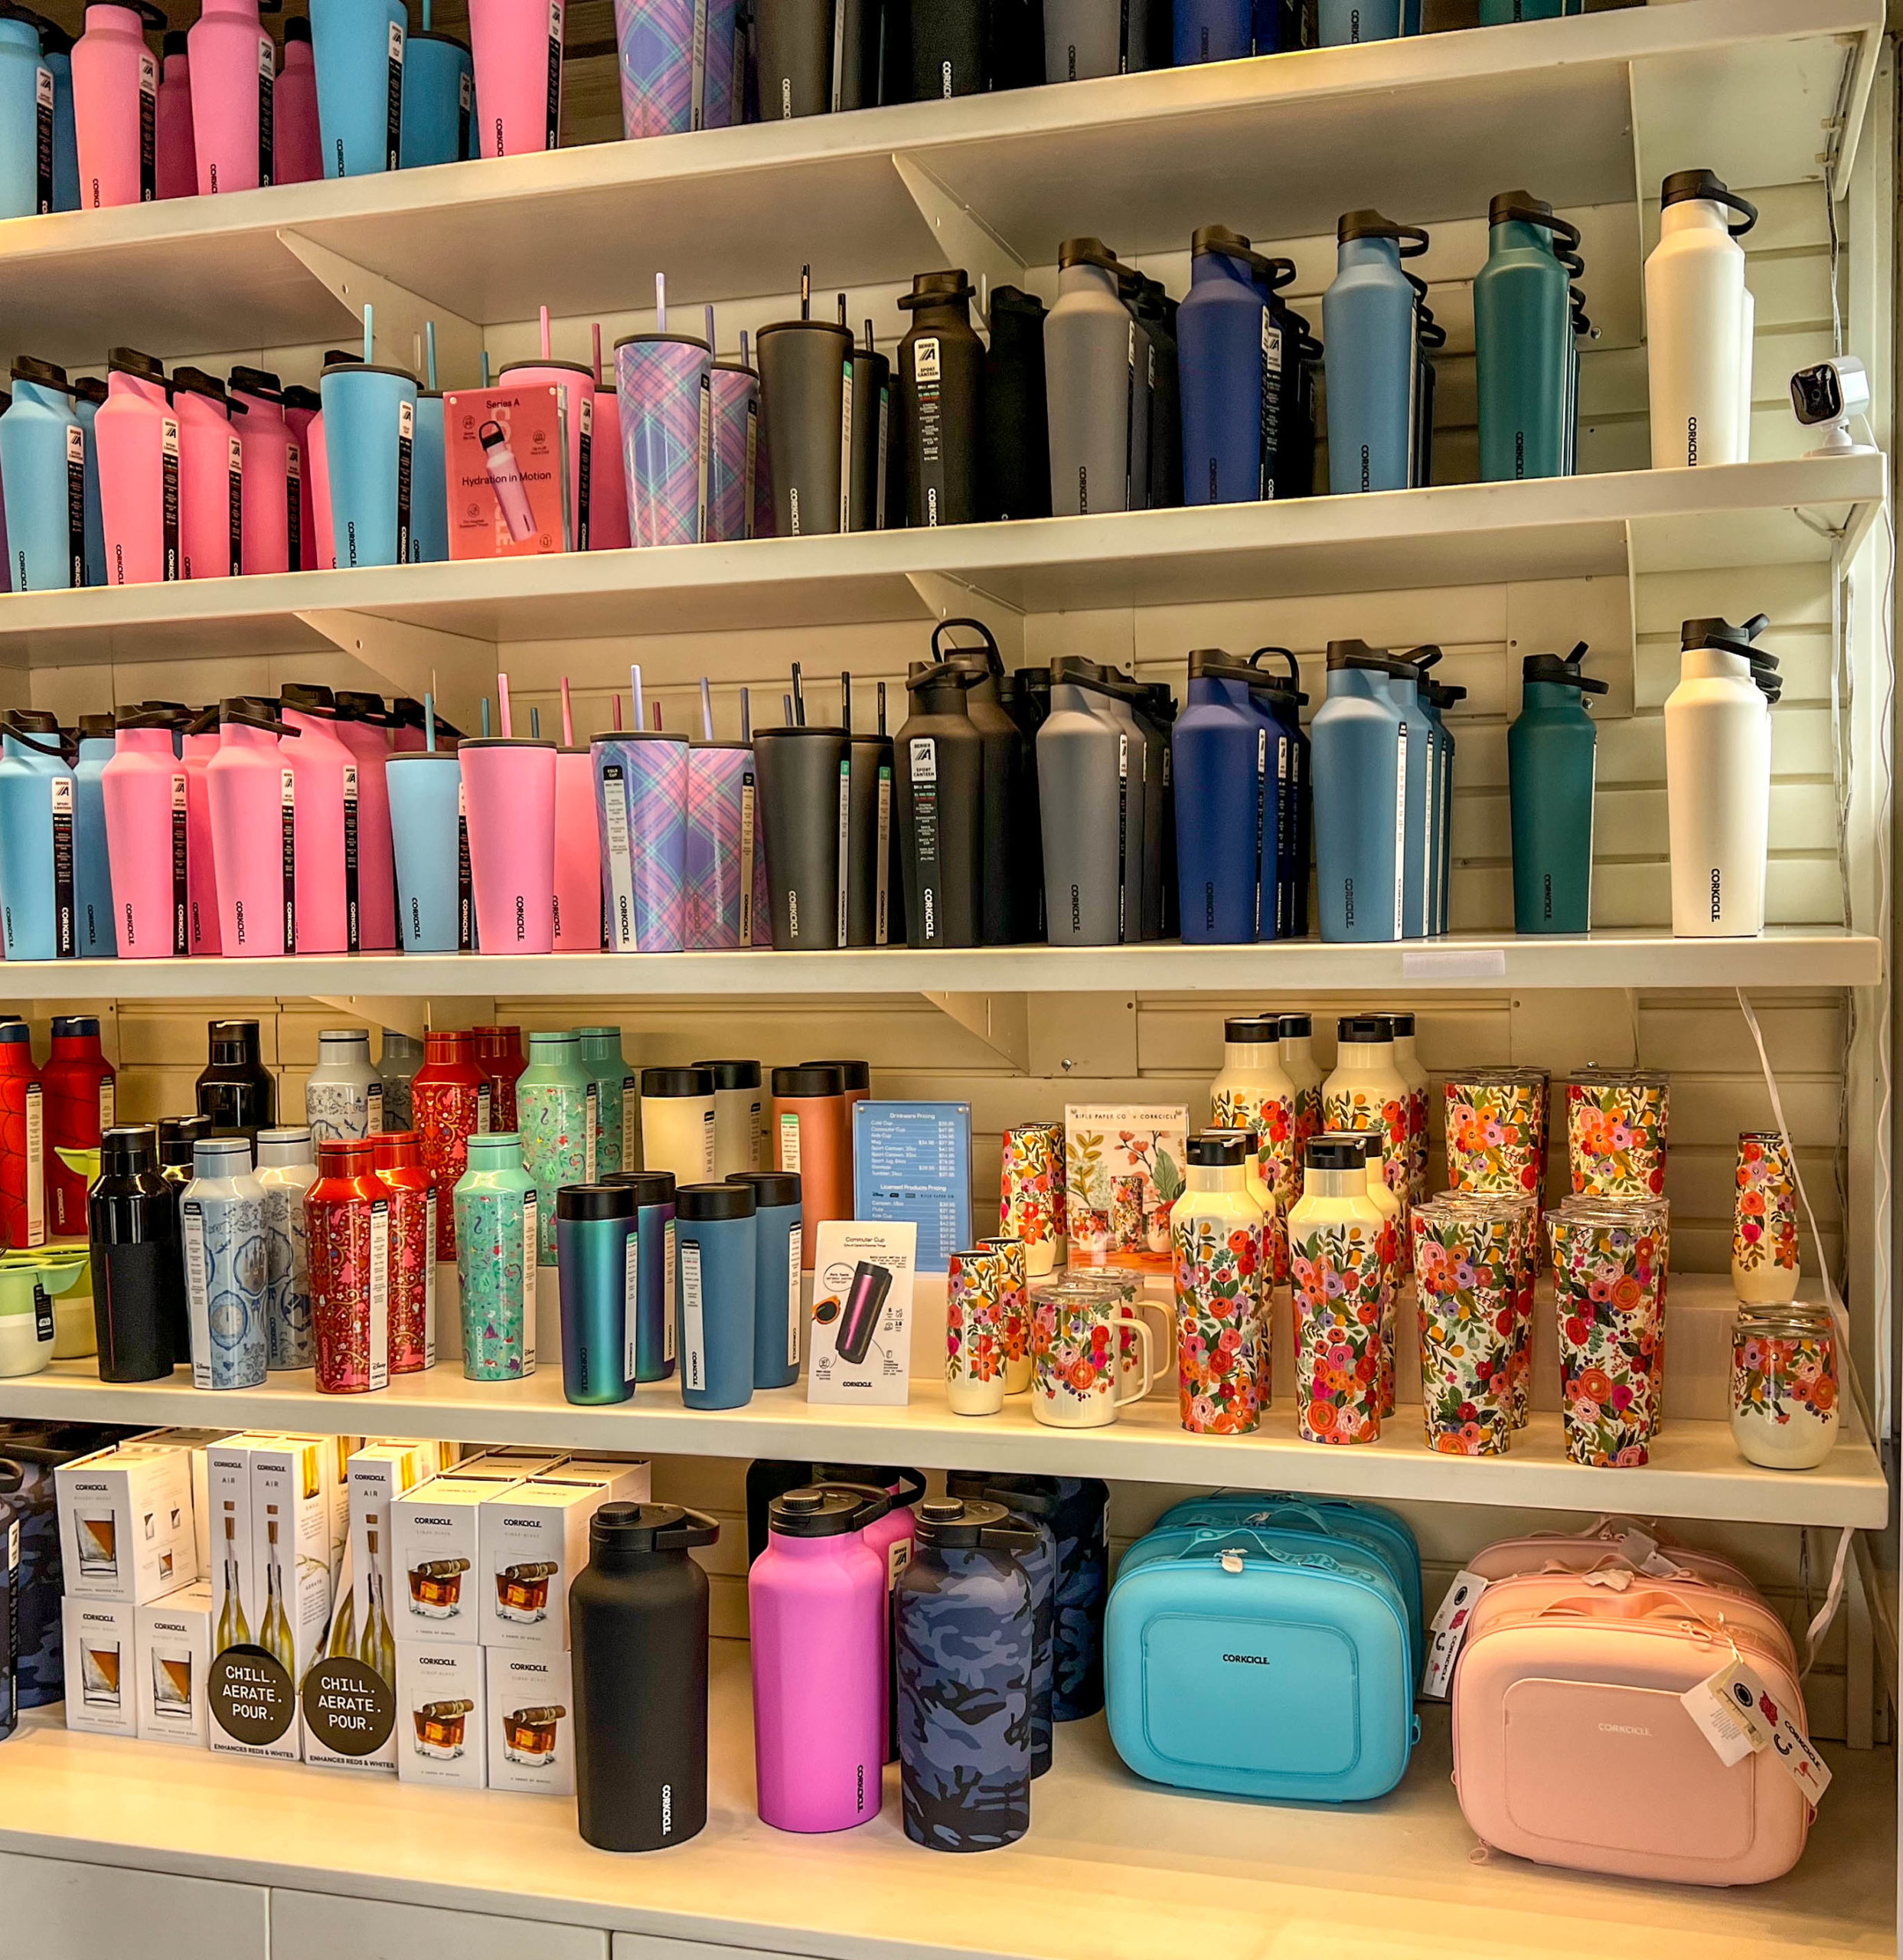 Corkcicle opens its first-ever retail location at Disney Springs in Walt  Disney World